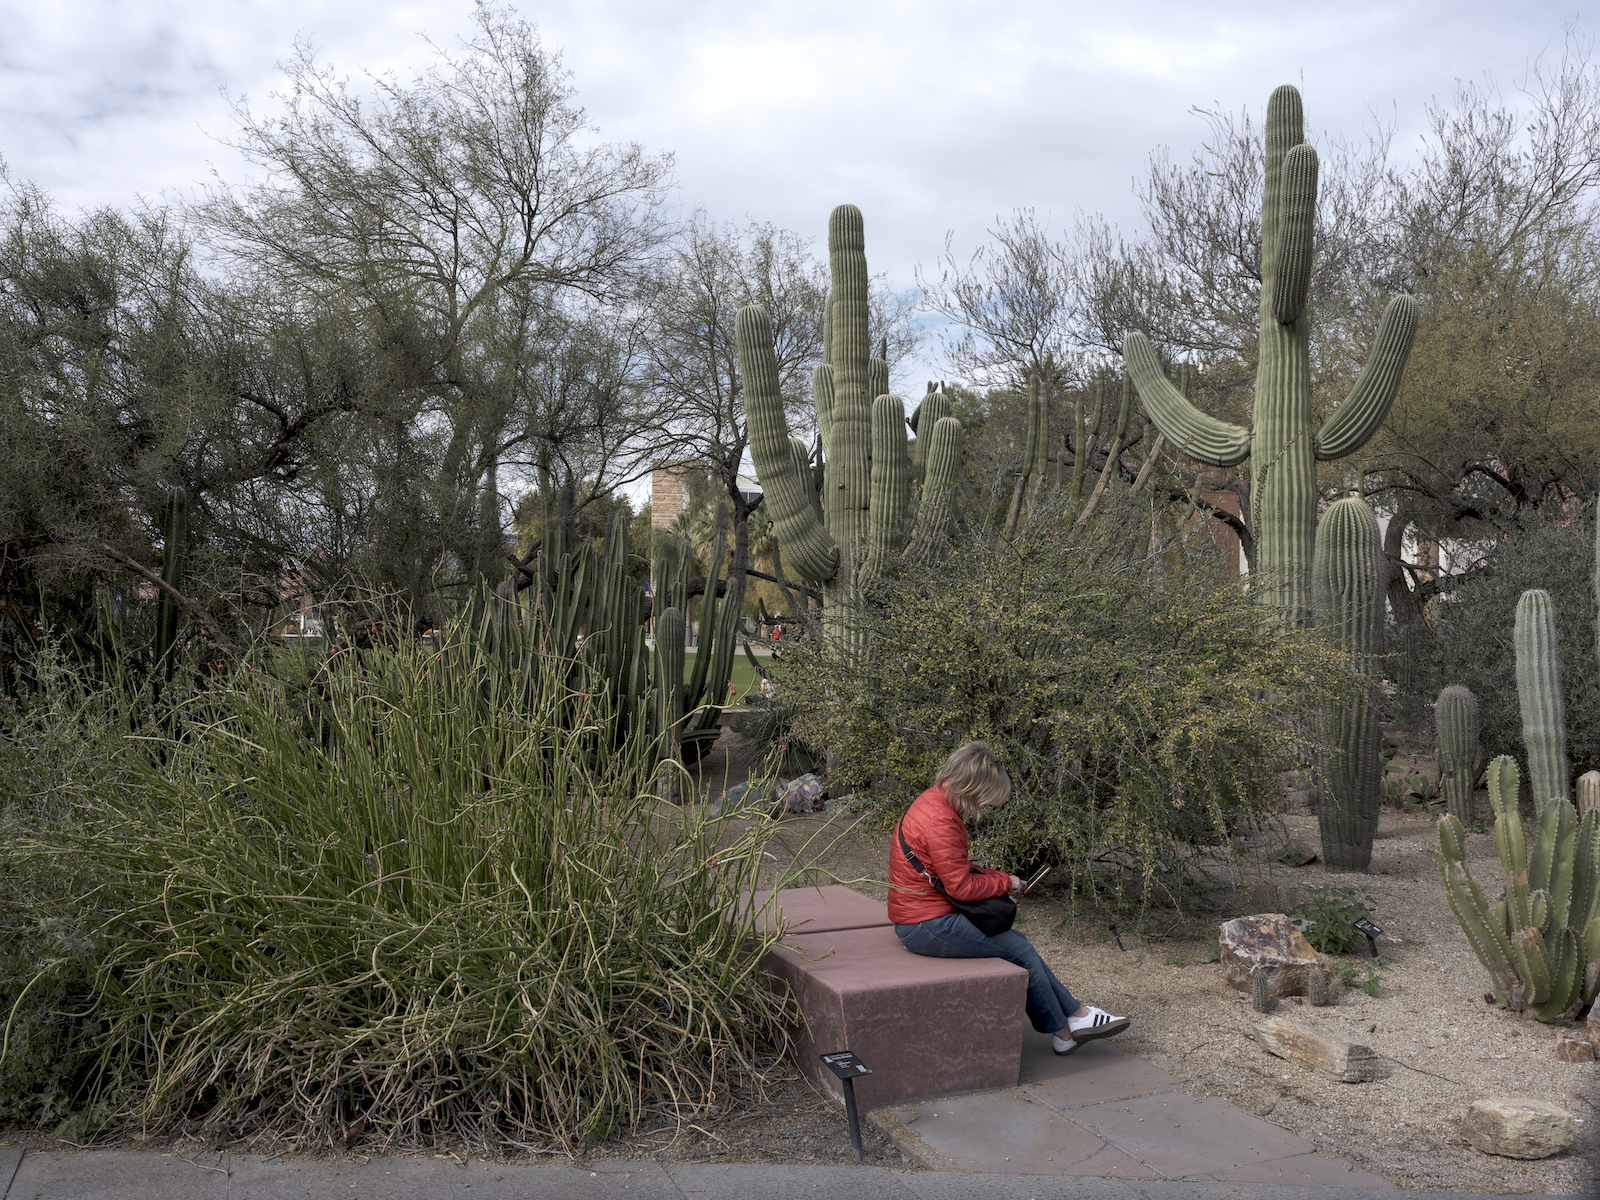 A person in a red jacket sits on a block near cacti. Her face is not visible.